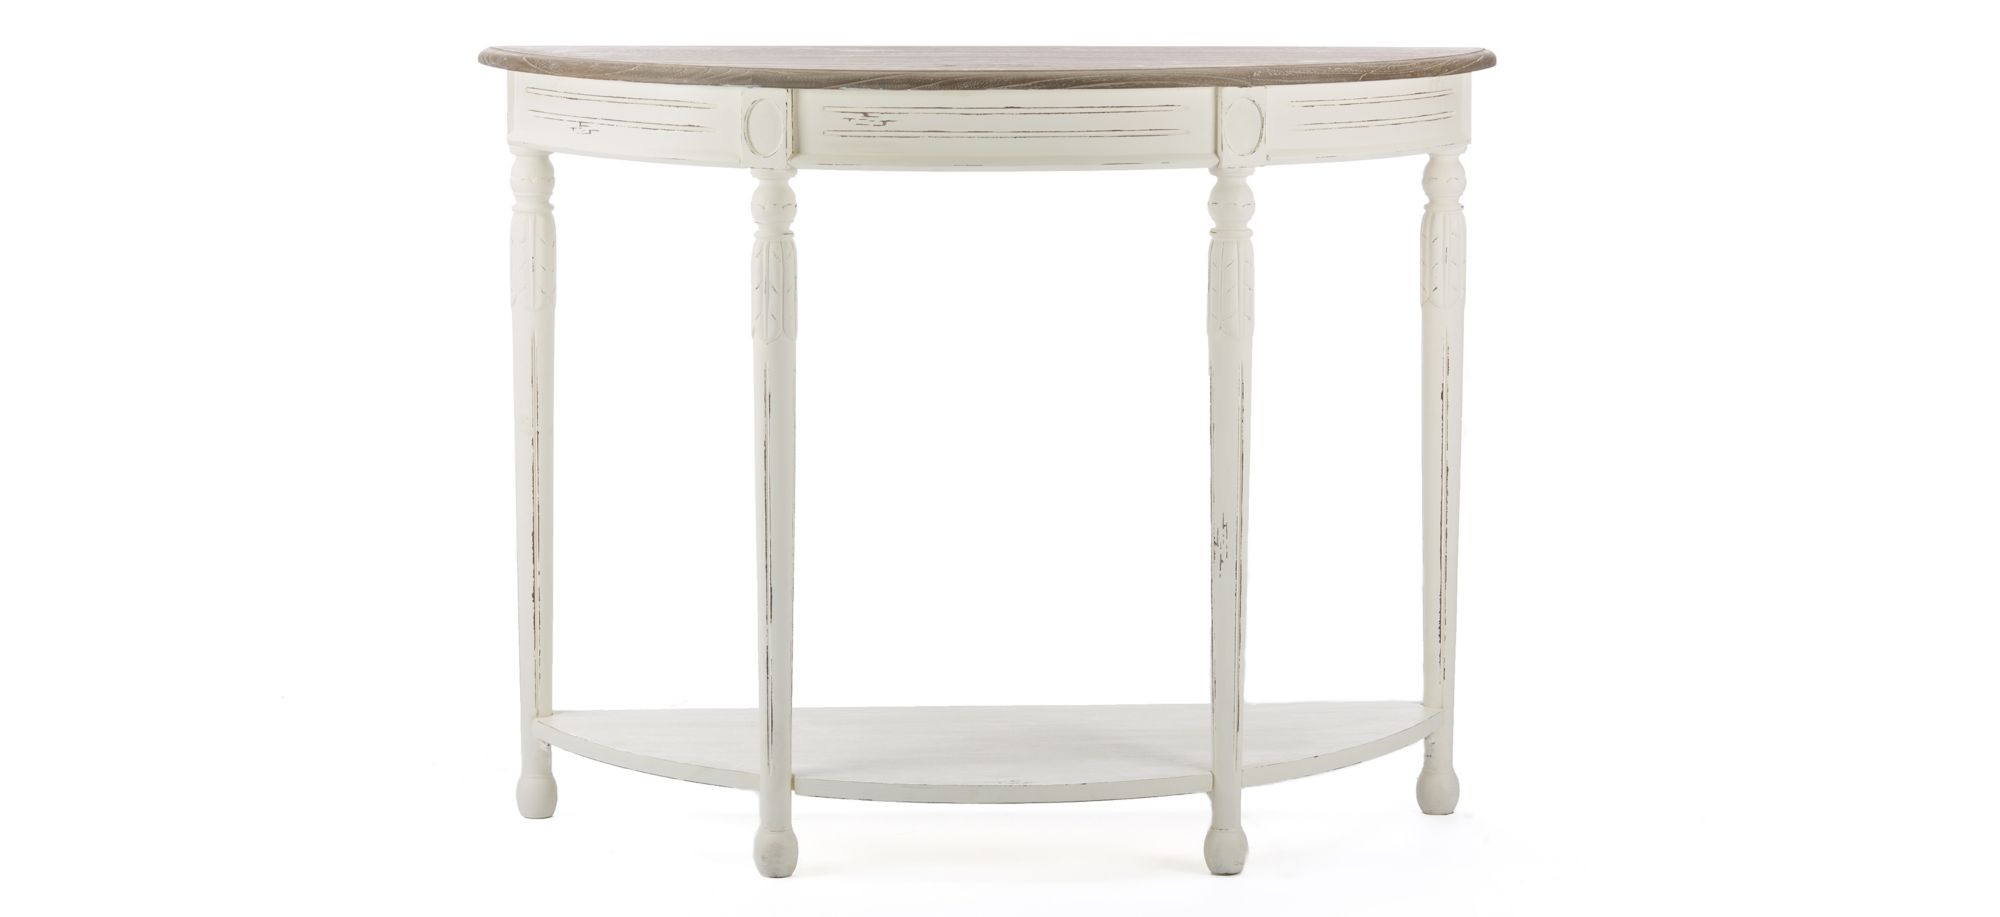 Vologne Console Table in White/Natural by Wholesale Interiors